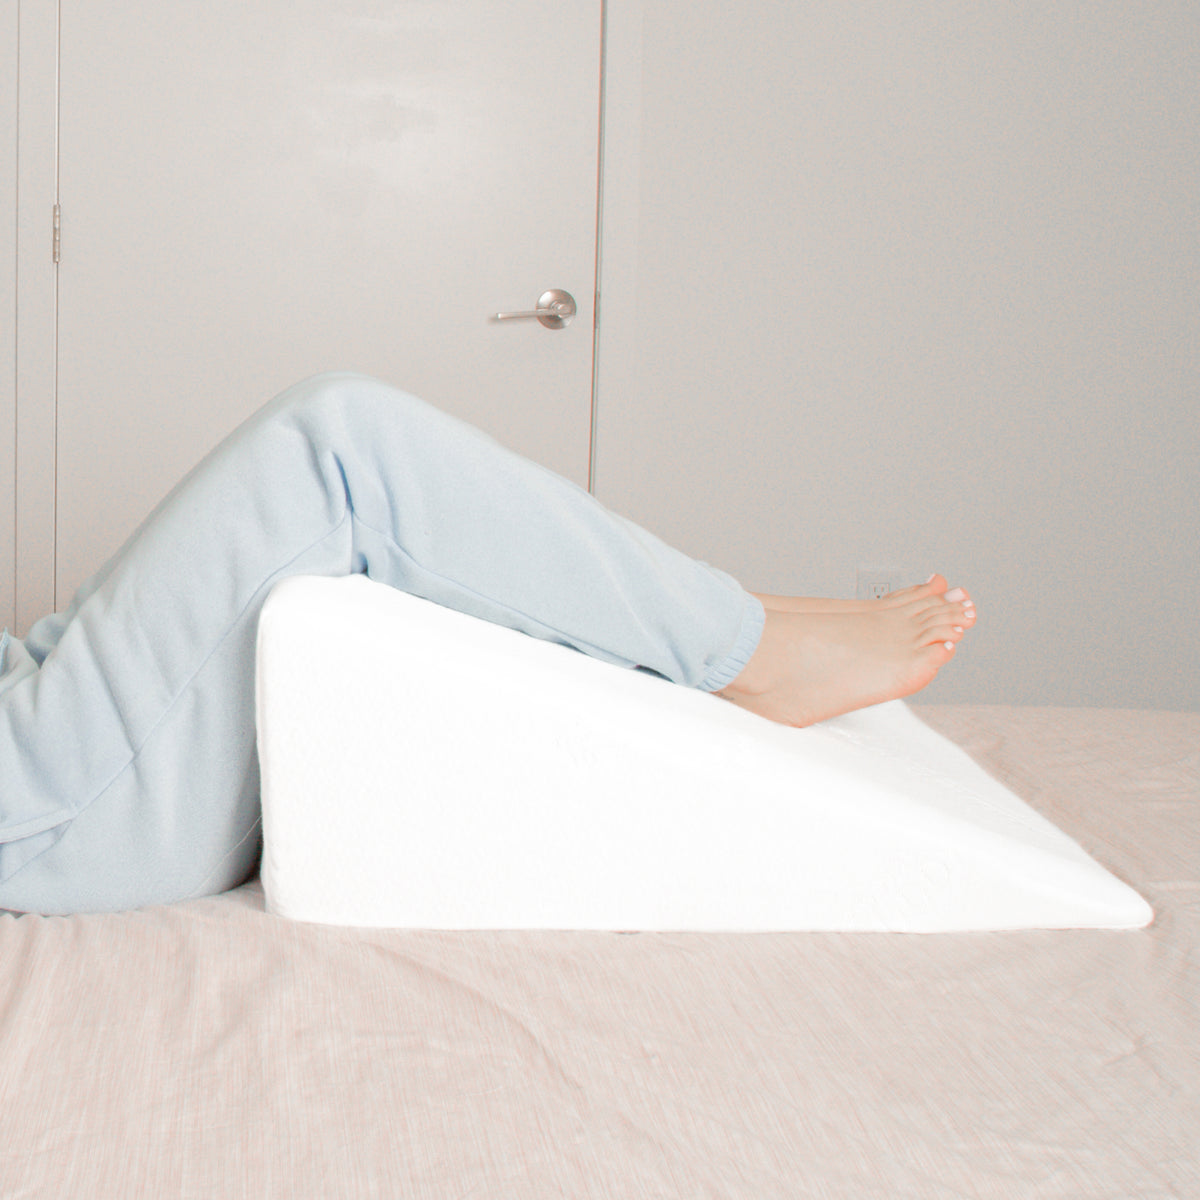 A wedge pillow on a bed with legs on it